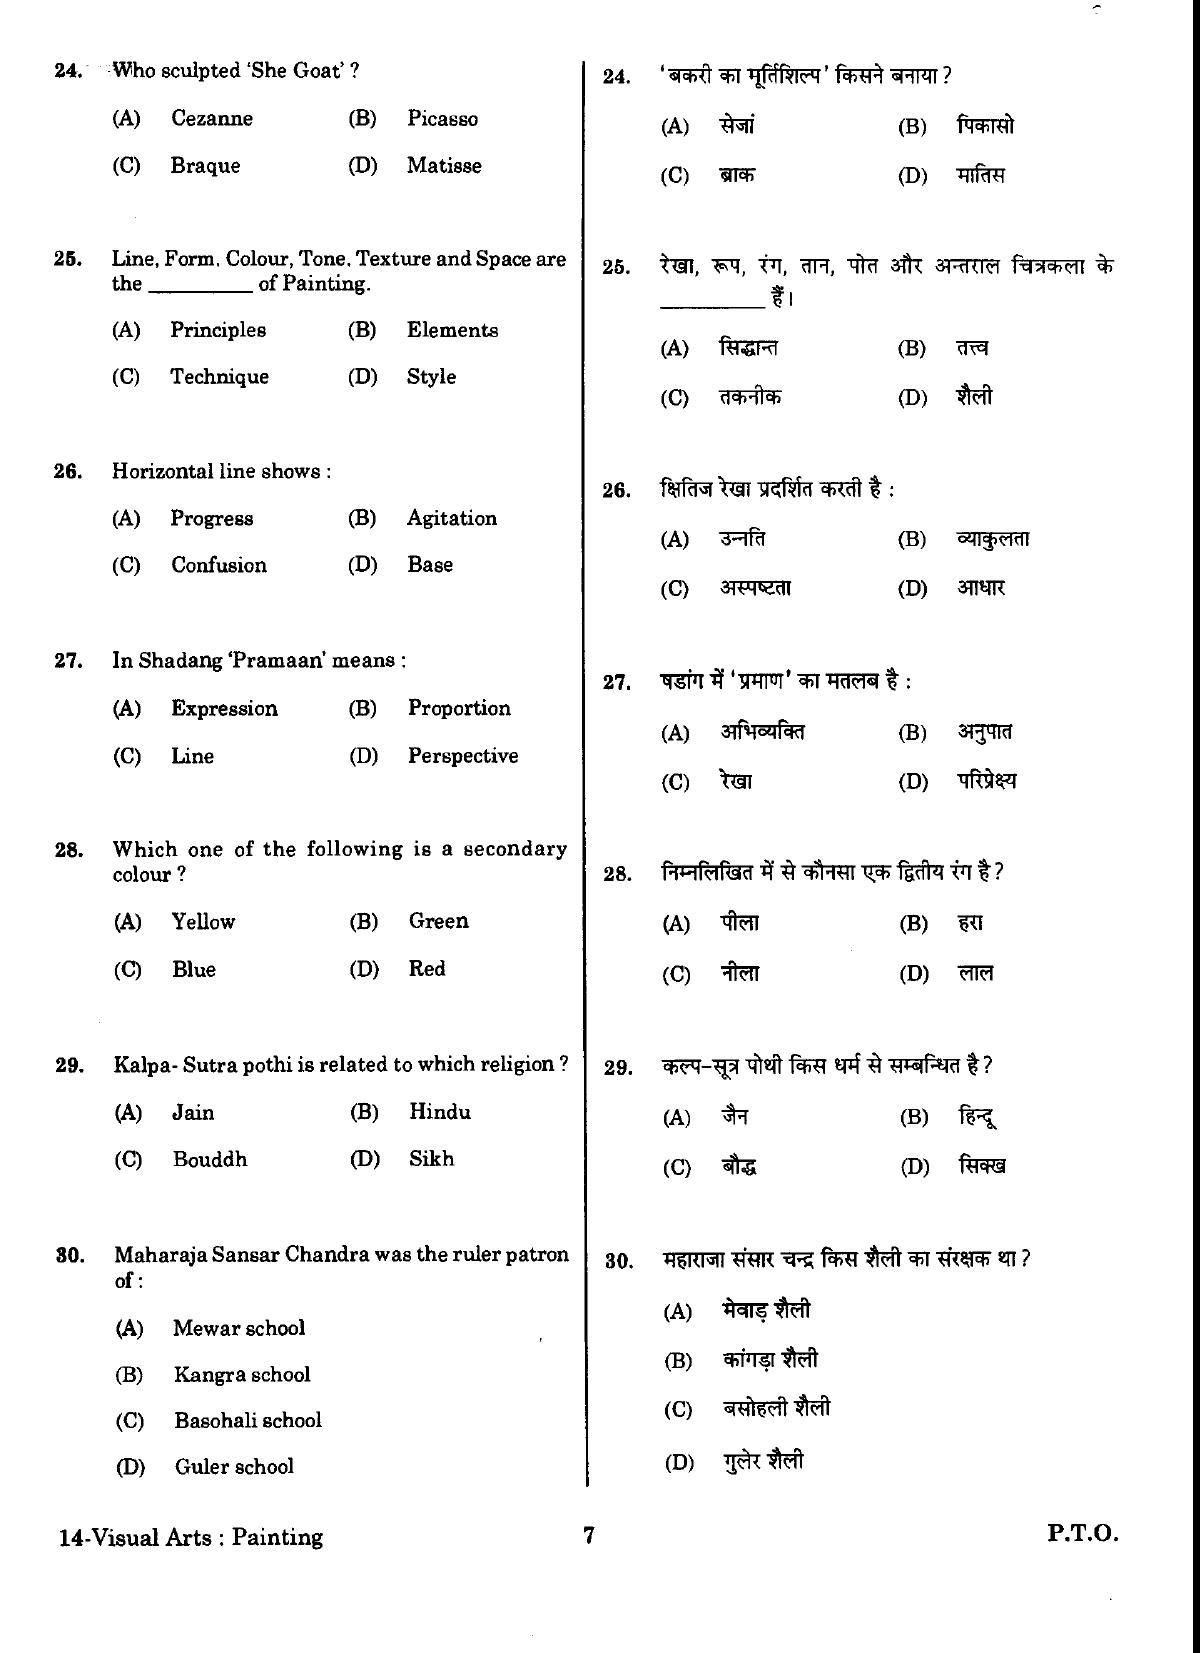 URATPG Visual Arts Painting Sample Question Paper 2018 - Page 6